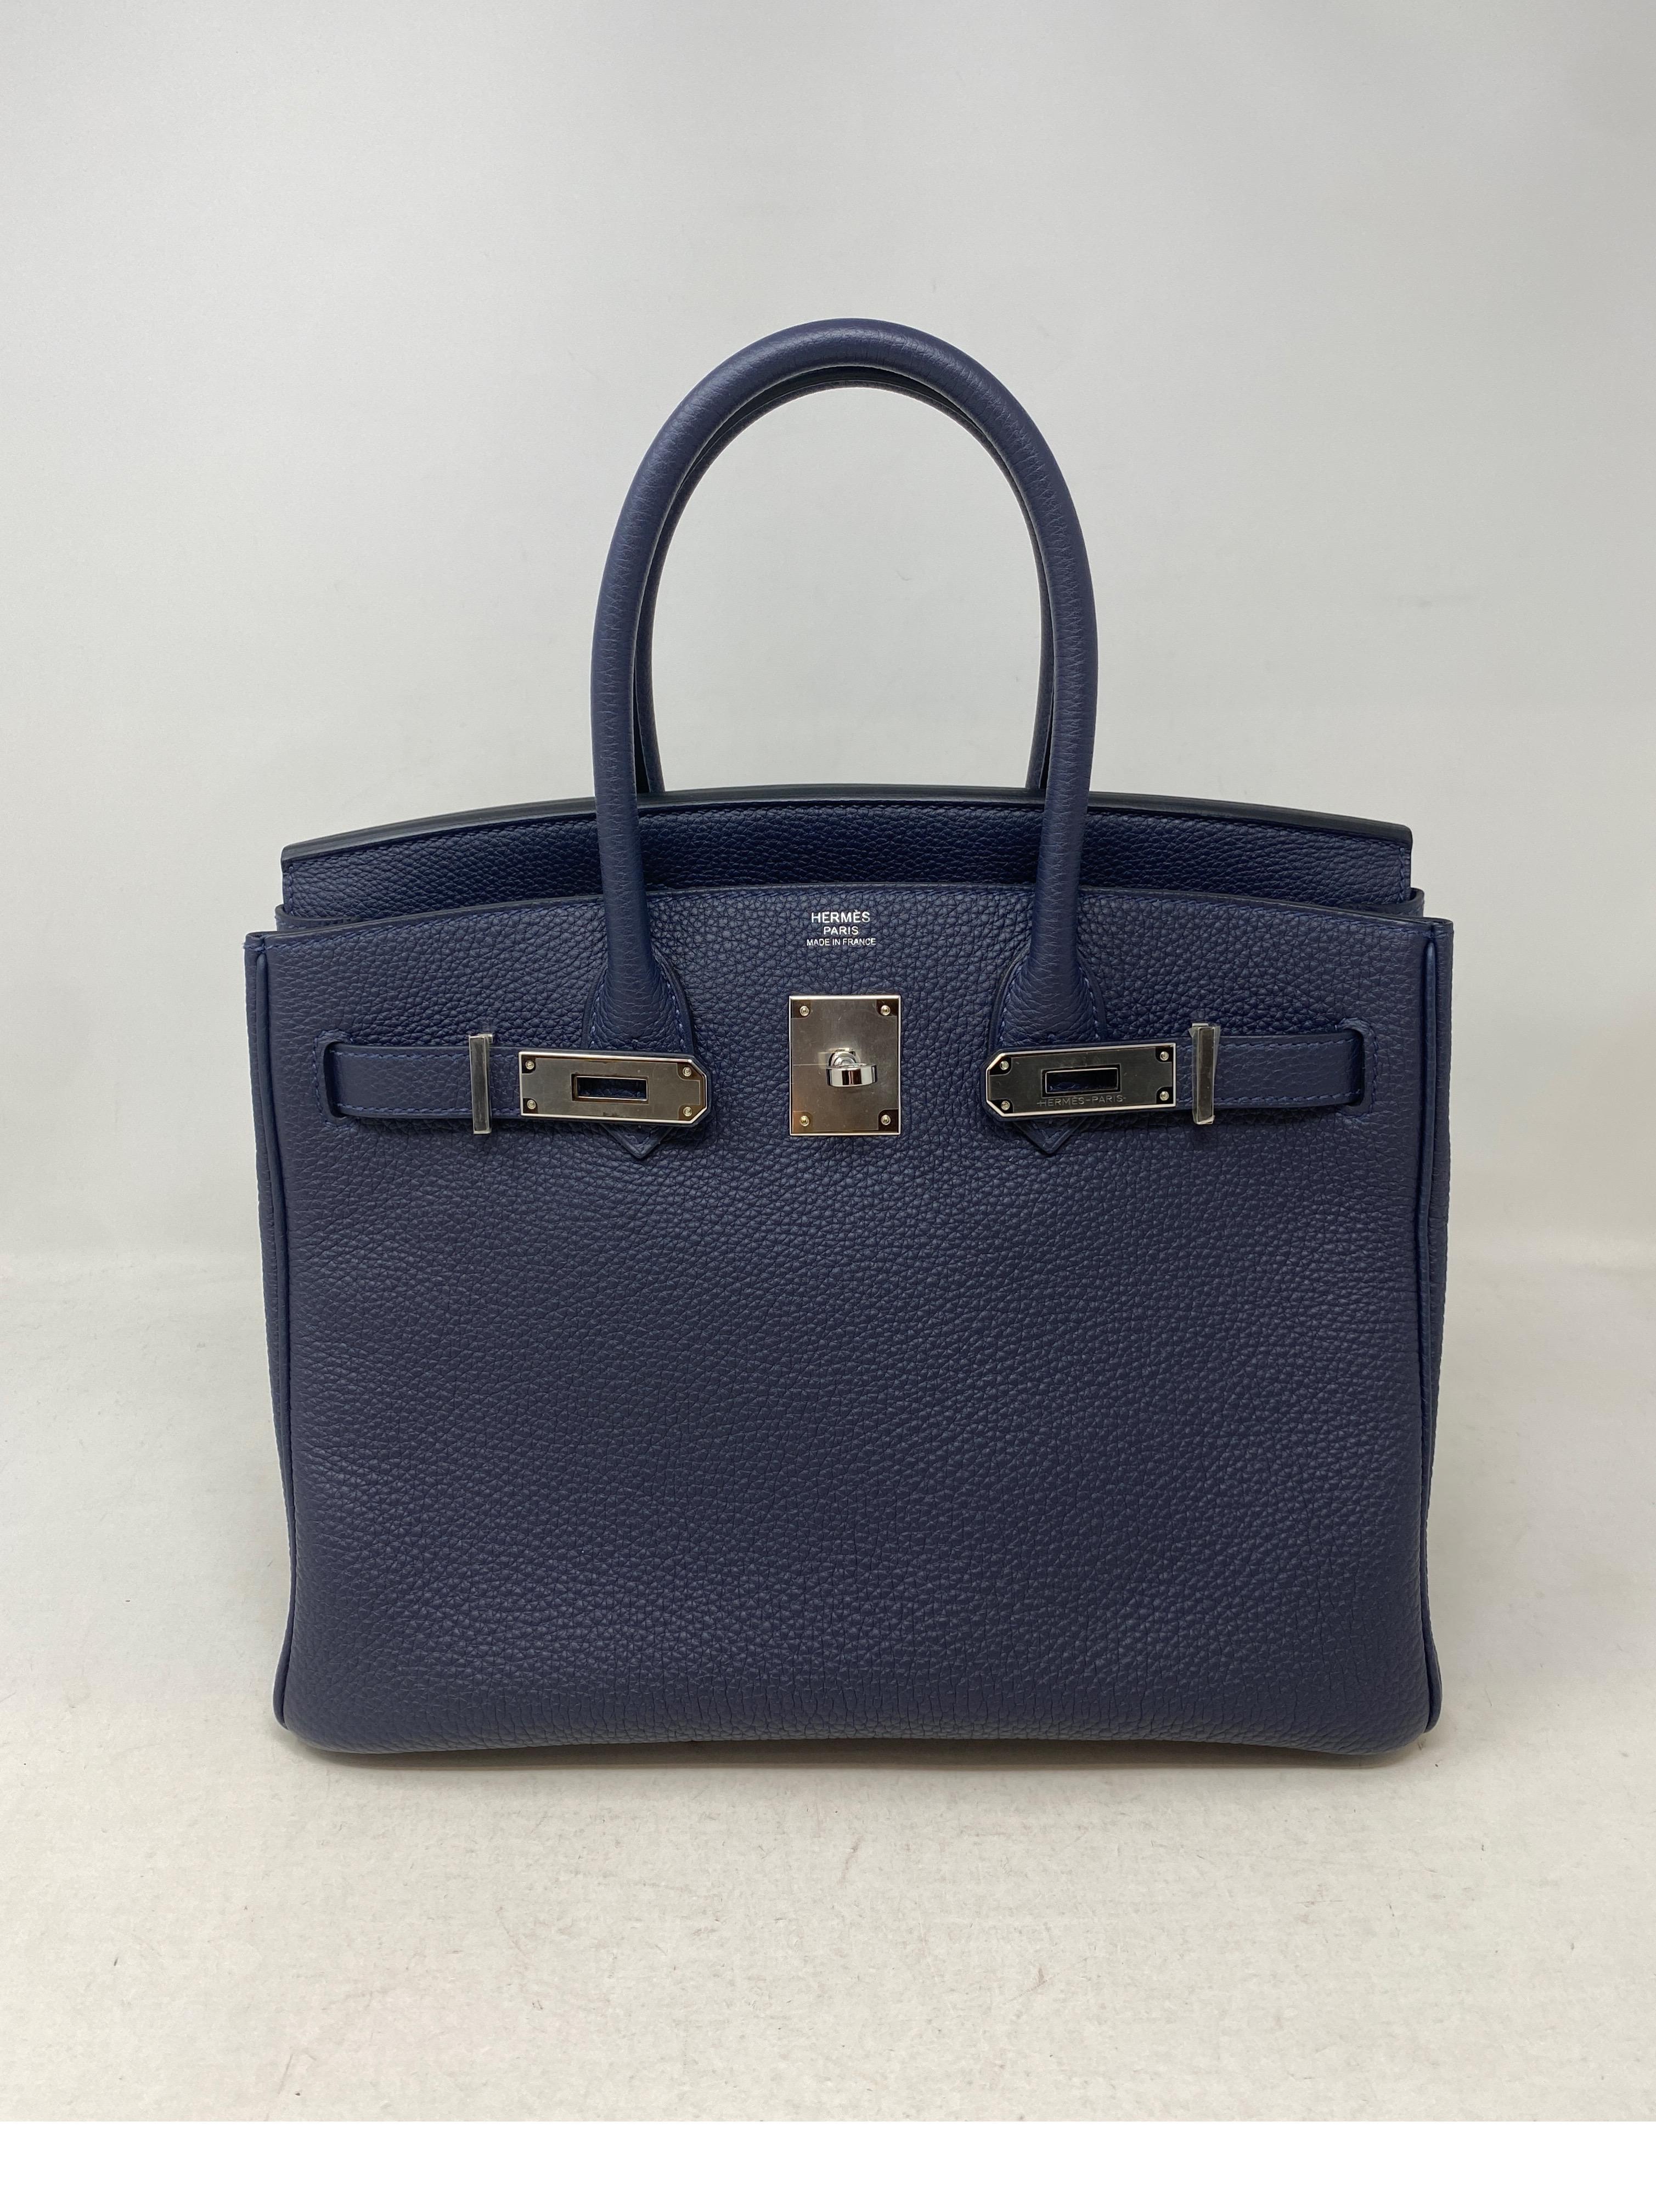 Hermes Navy Birkin 30 Bag. Palladium hardware. Rare navy color. Looks like new. Excellent condition. Gorgeous dark blue Birkin. Most wanted size 30. Interior clean. Includes clochette, lock, keys, and dust bag. Guaranteed authentic. 